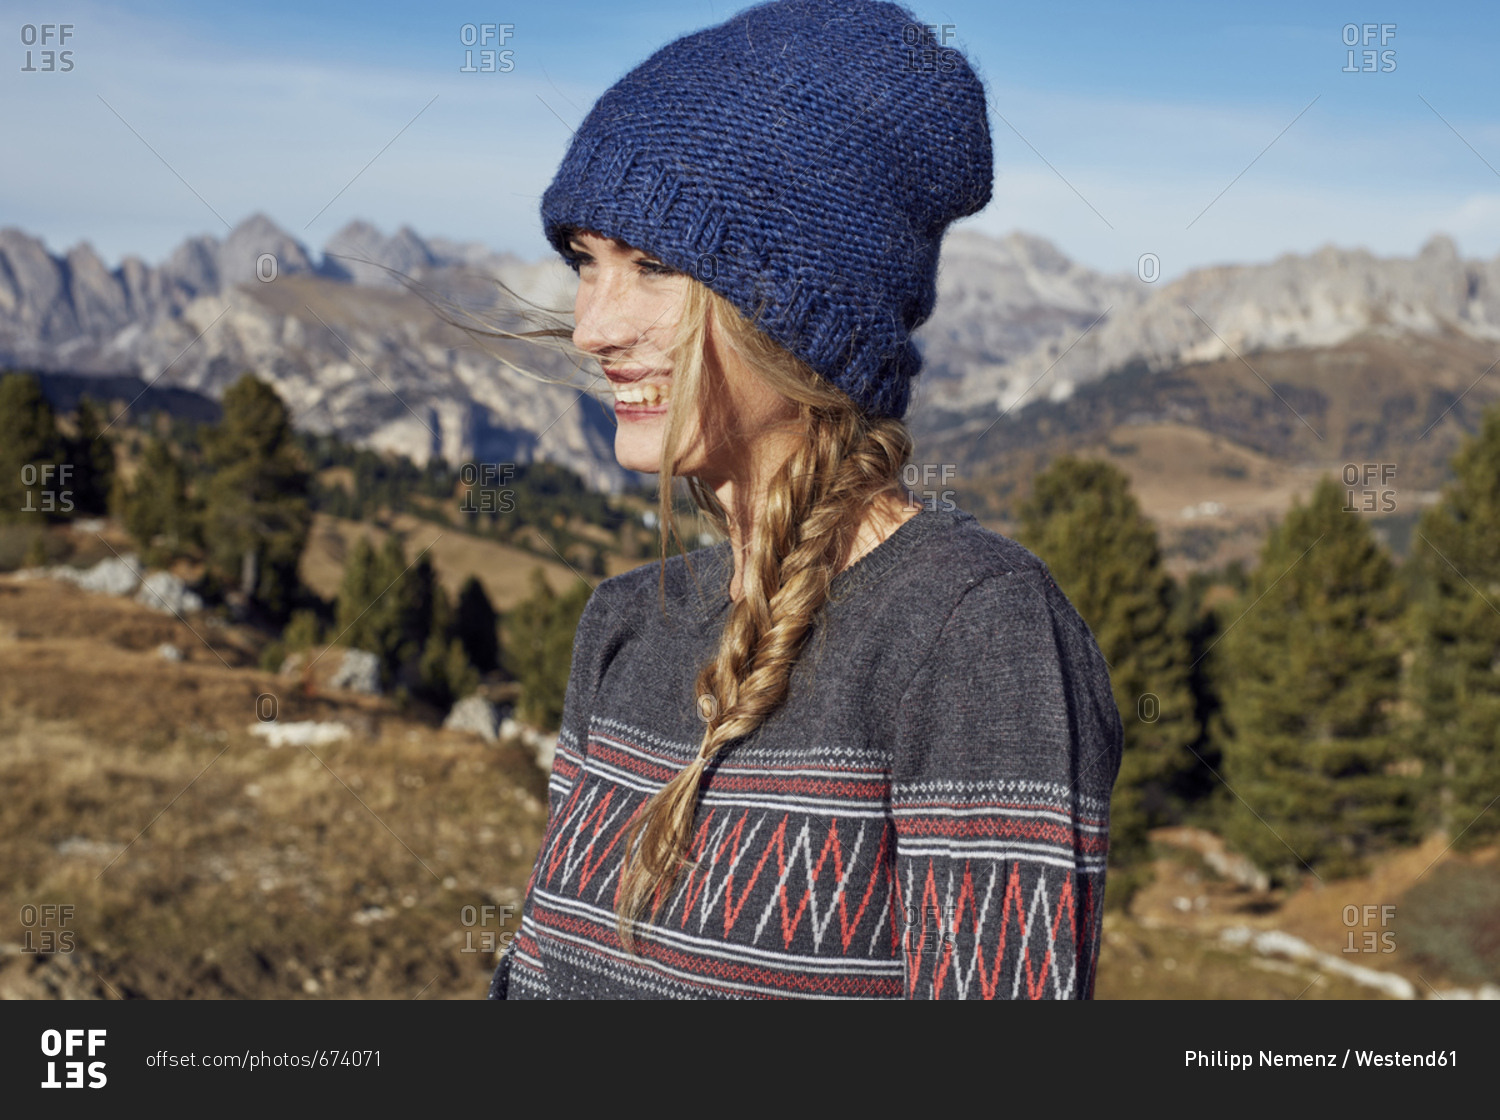 Portrait of happy young woman hiking in the mountains